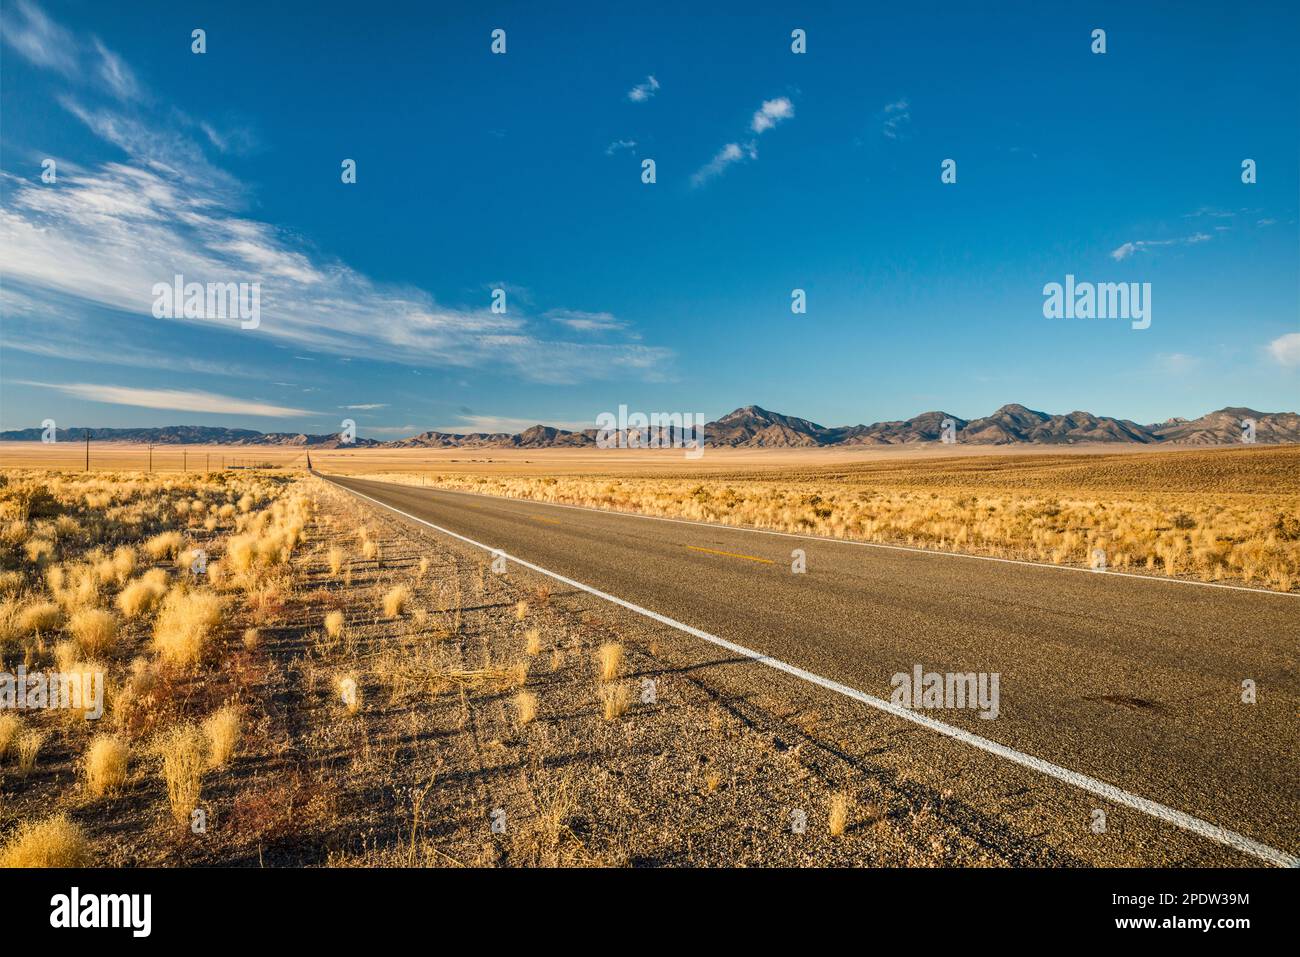 15 miles long straight line of Grand Army of the Republic Highway (US 6), Hot Creek Range in distance, Great Basin Desert, east of Tonopah, Nevada USA Stock Photo